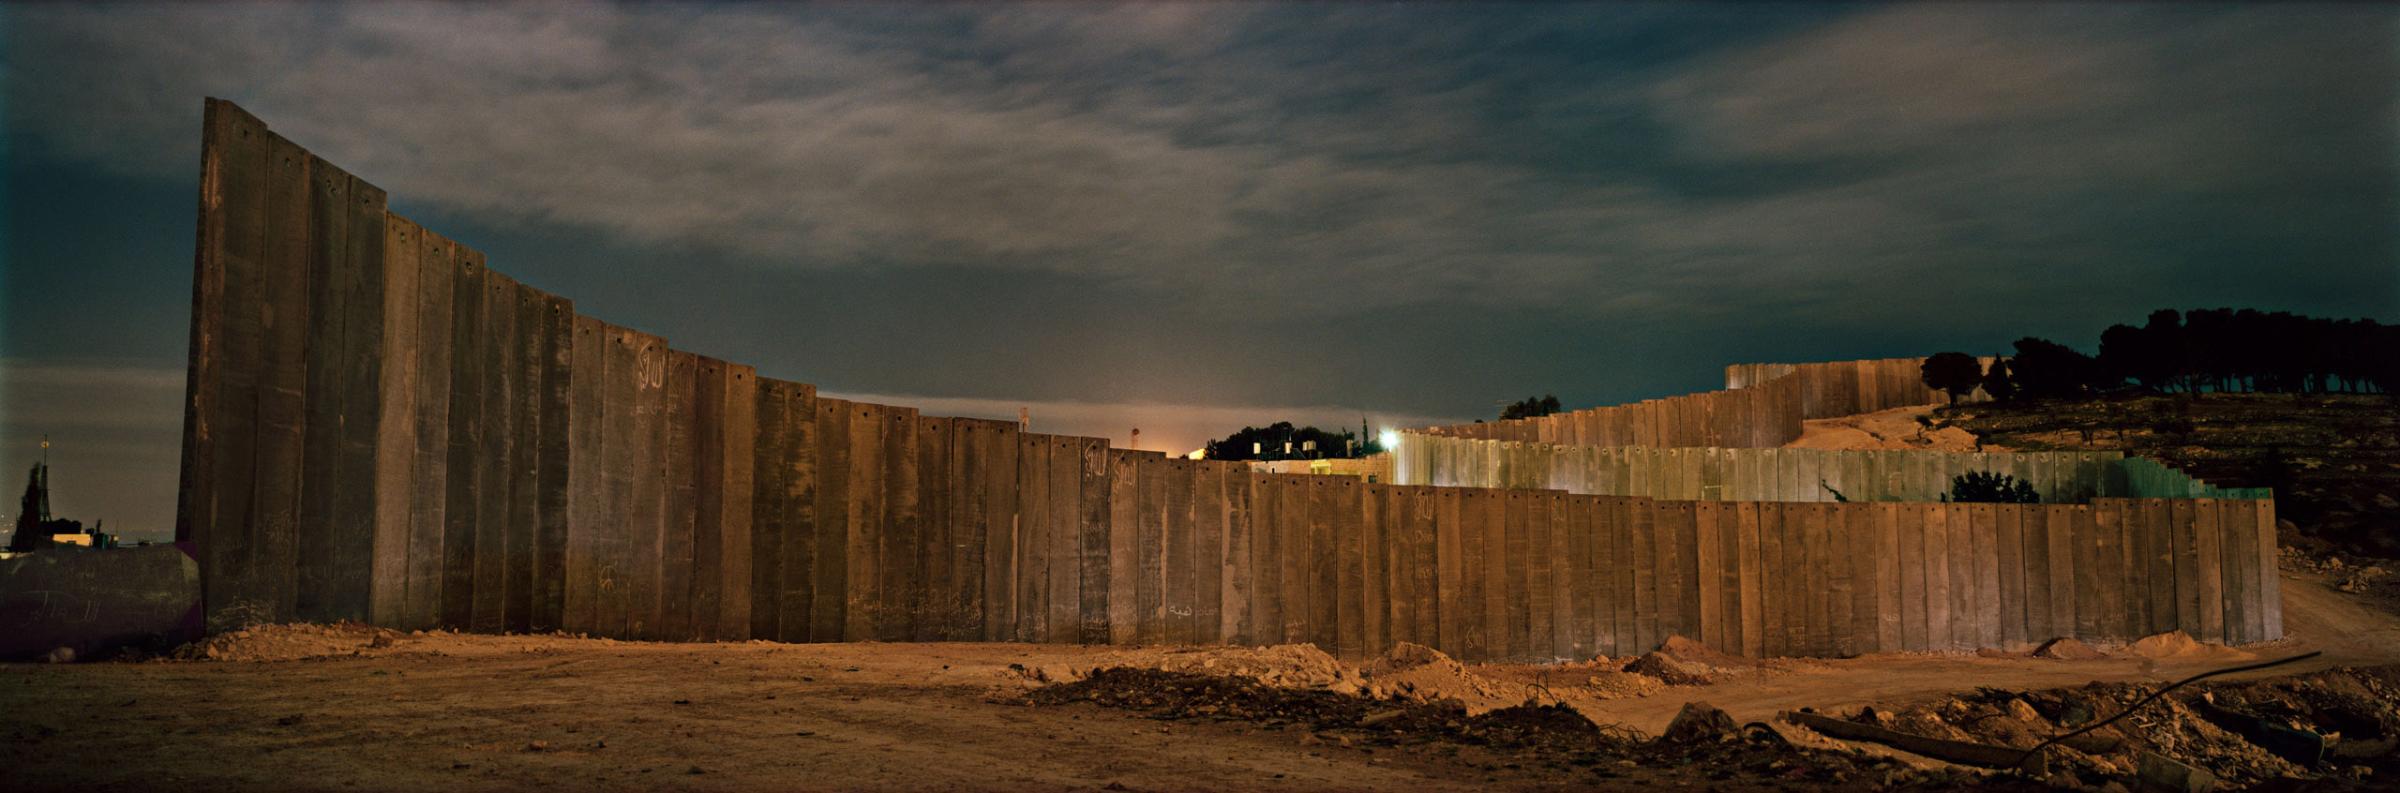 A piece of wall under construction in the Jerusalem neighbourhood of Abu Dis at night. 
Occupied Palestinian Territories, March 2004.